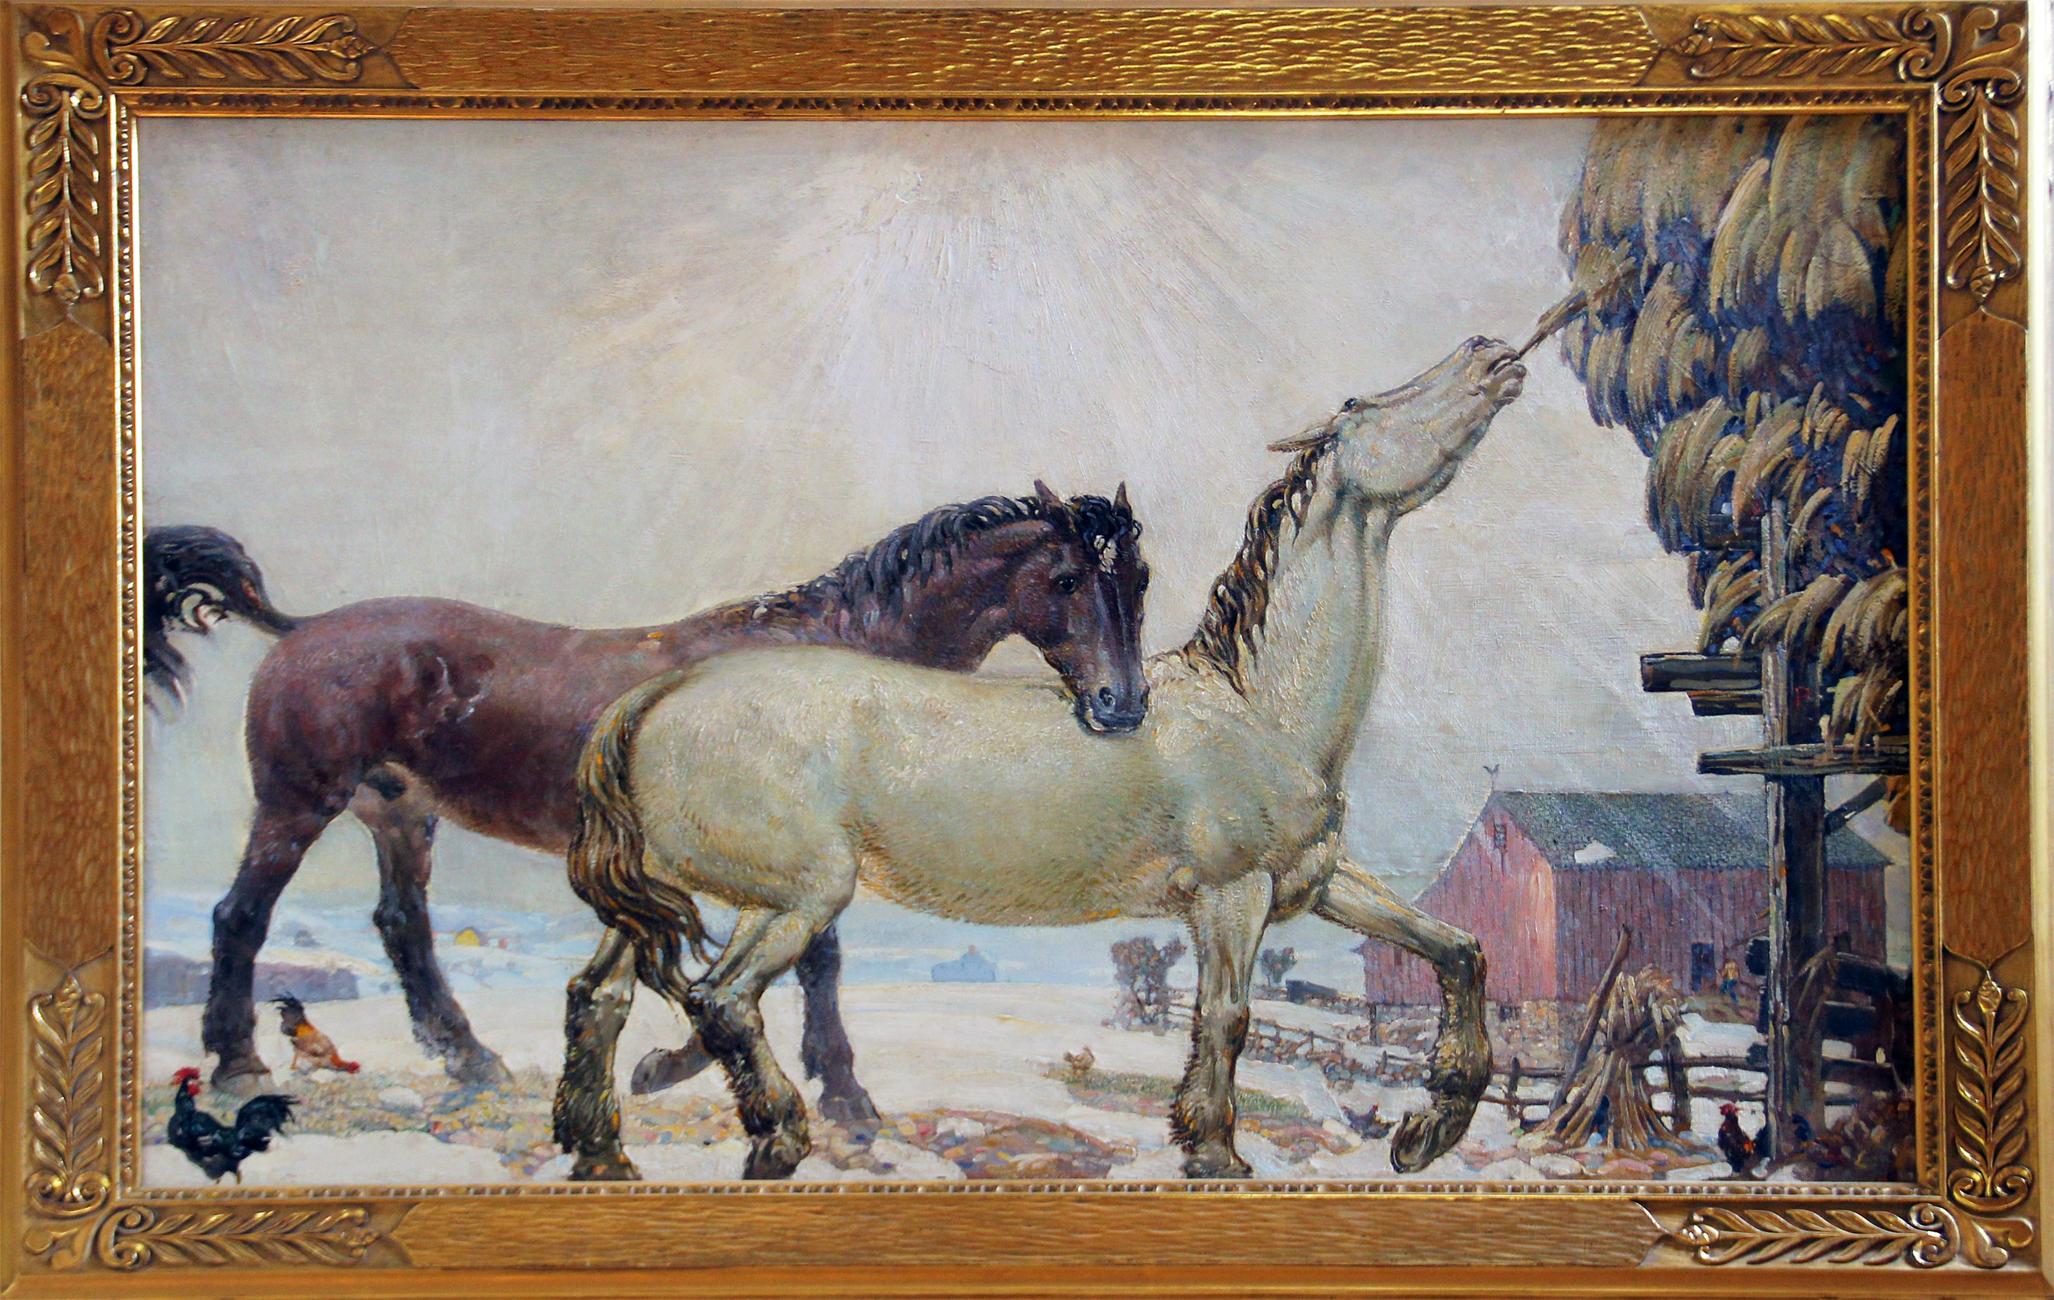 "Horses Feeding" is a 40 1/2" x 56 1/4" oil on masonite, equestrian painting by Joseph Thurman Pearson, Jr. It is signed "P" in the middle right with an estate signature stamp on verso. The painting comes from the estate of the artist. Additional